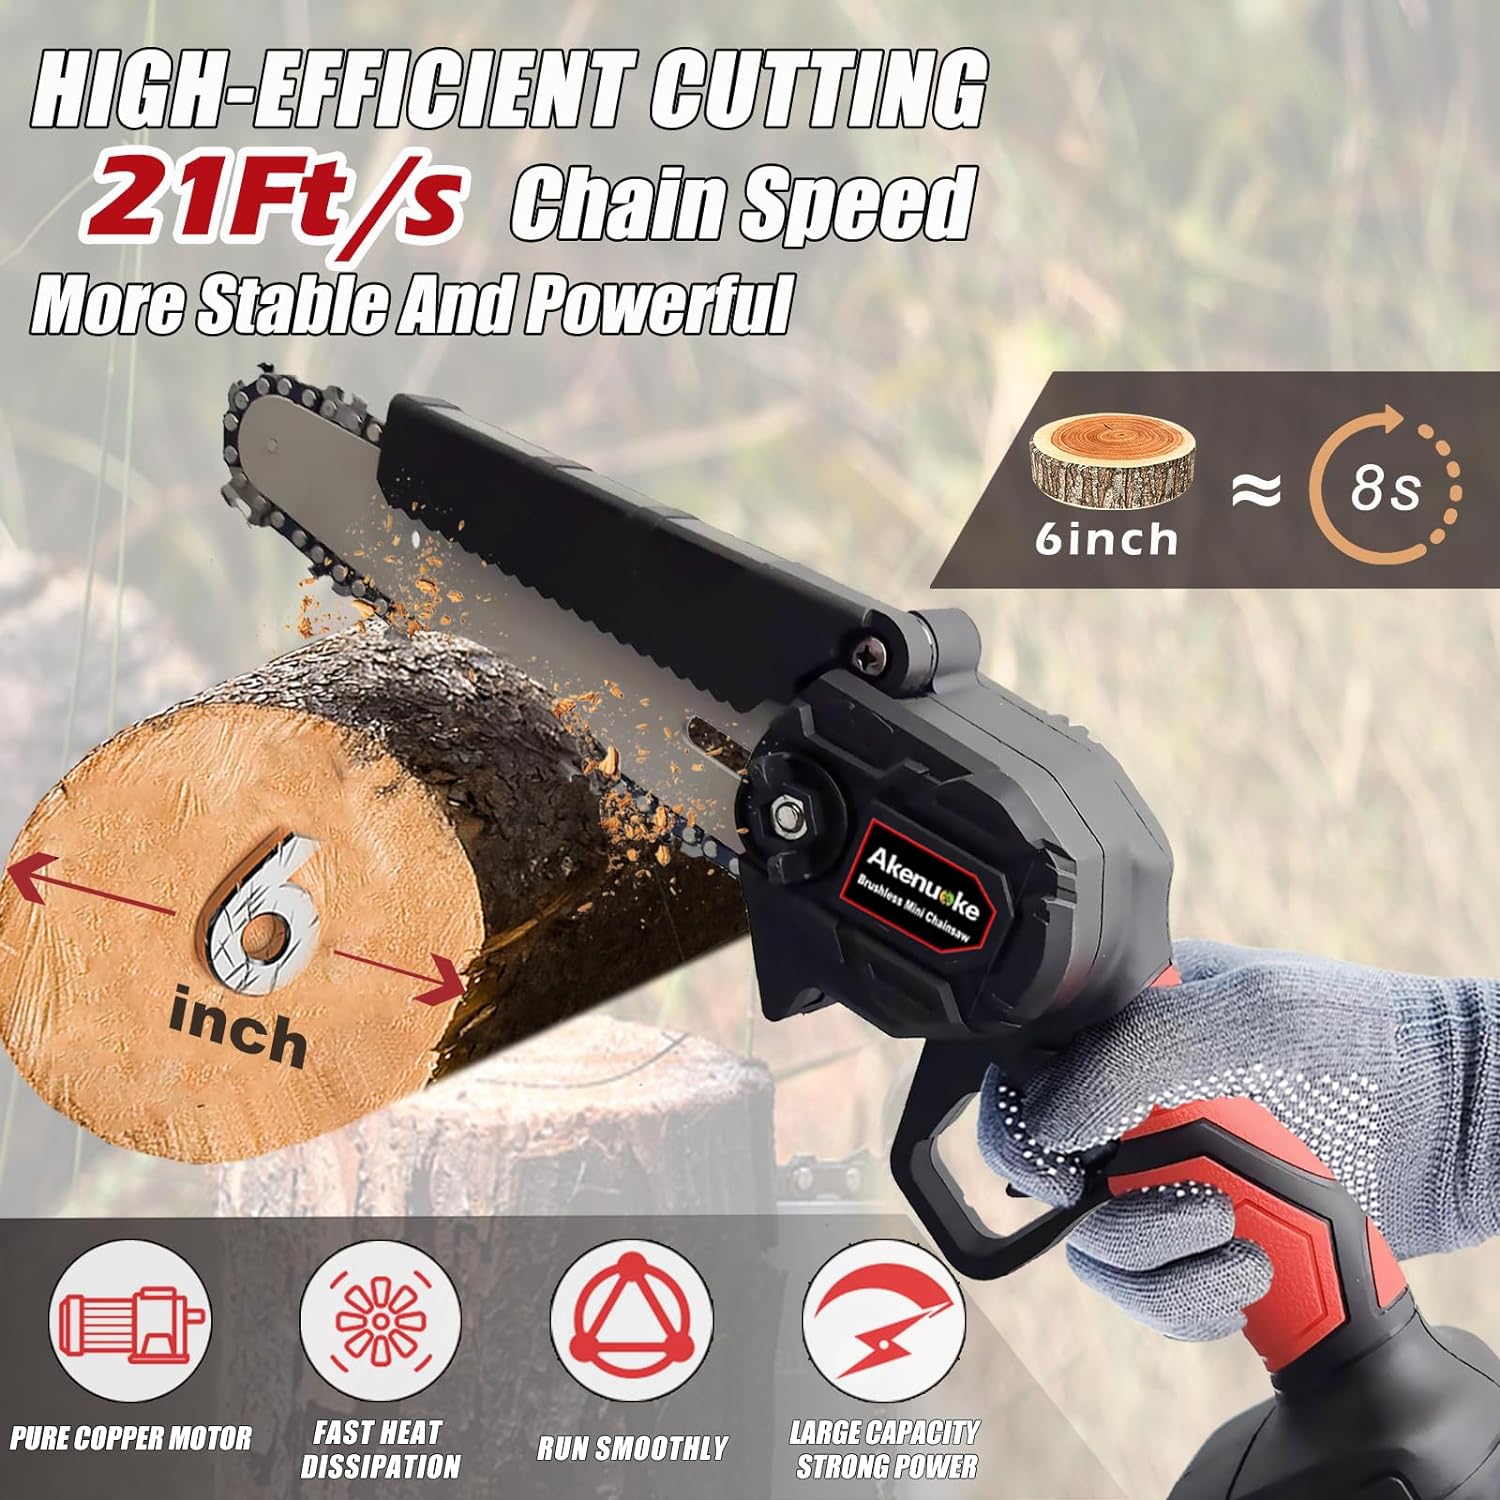 Mini Chainsaw Cordless 6 Inch Battery Powered, Electric Mini Chain saw with 2 Batteries & 2 Chains, Portable Handheld Chainsaw for Tree pruning & Wood Cutting, Small Rechargeable Power Chain Saws